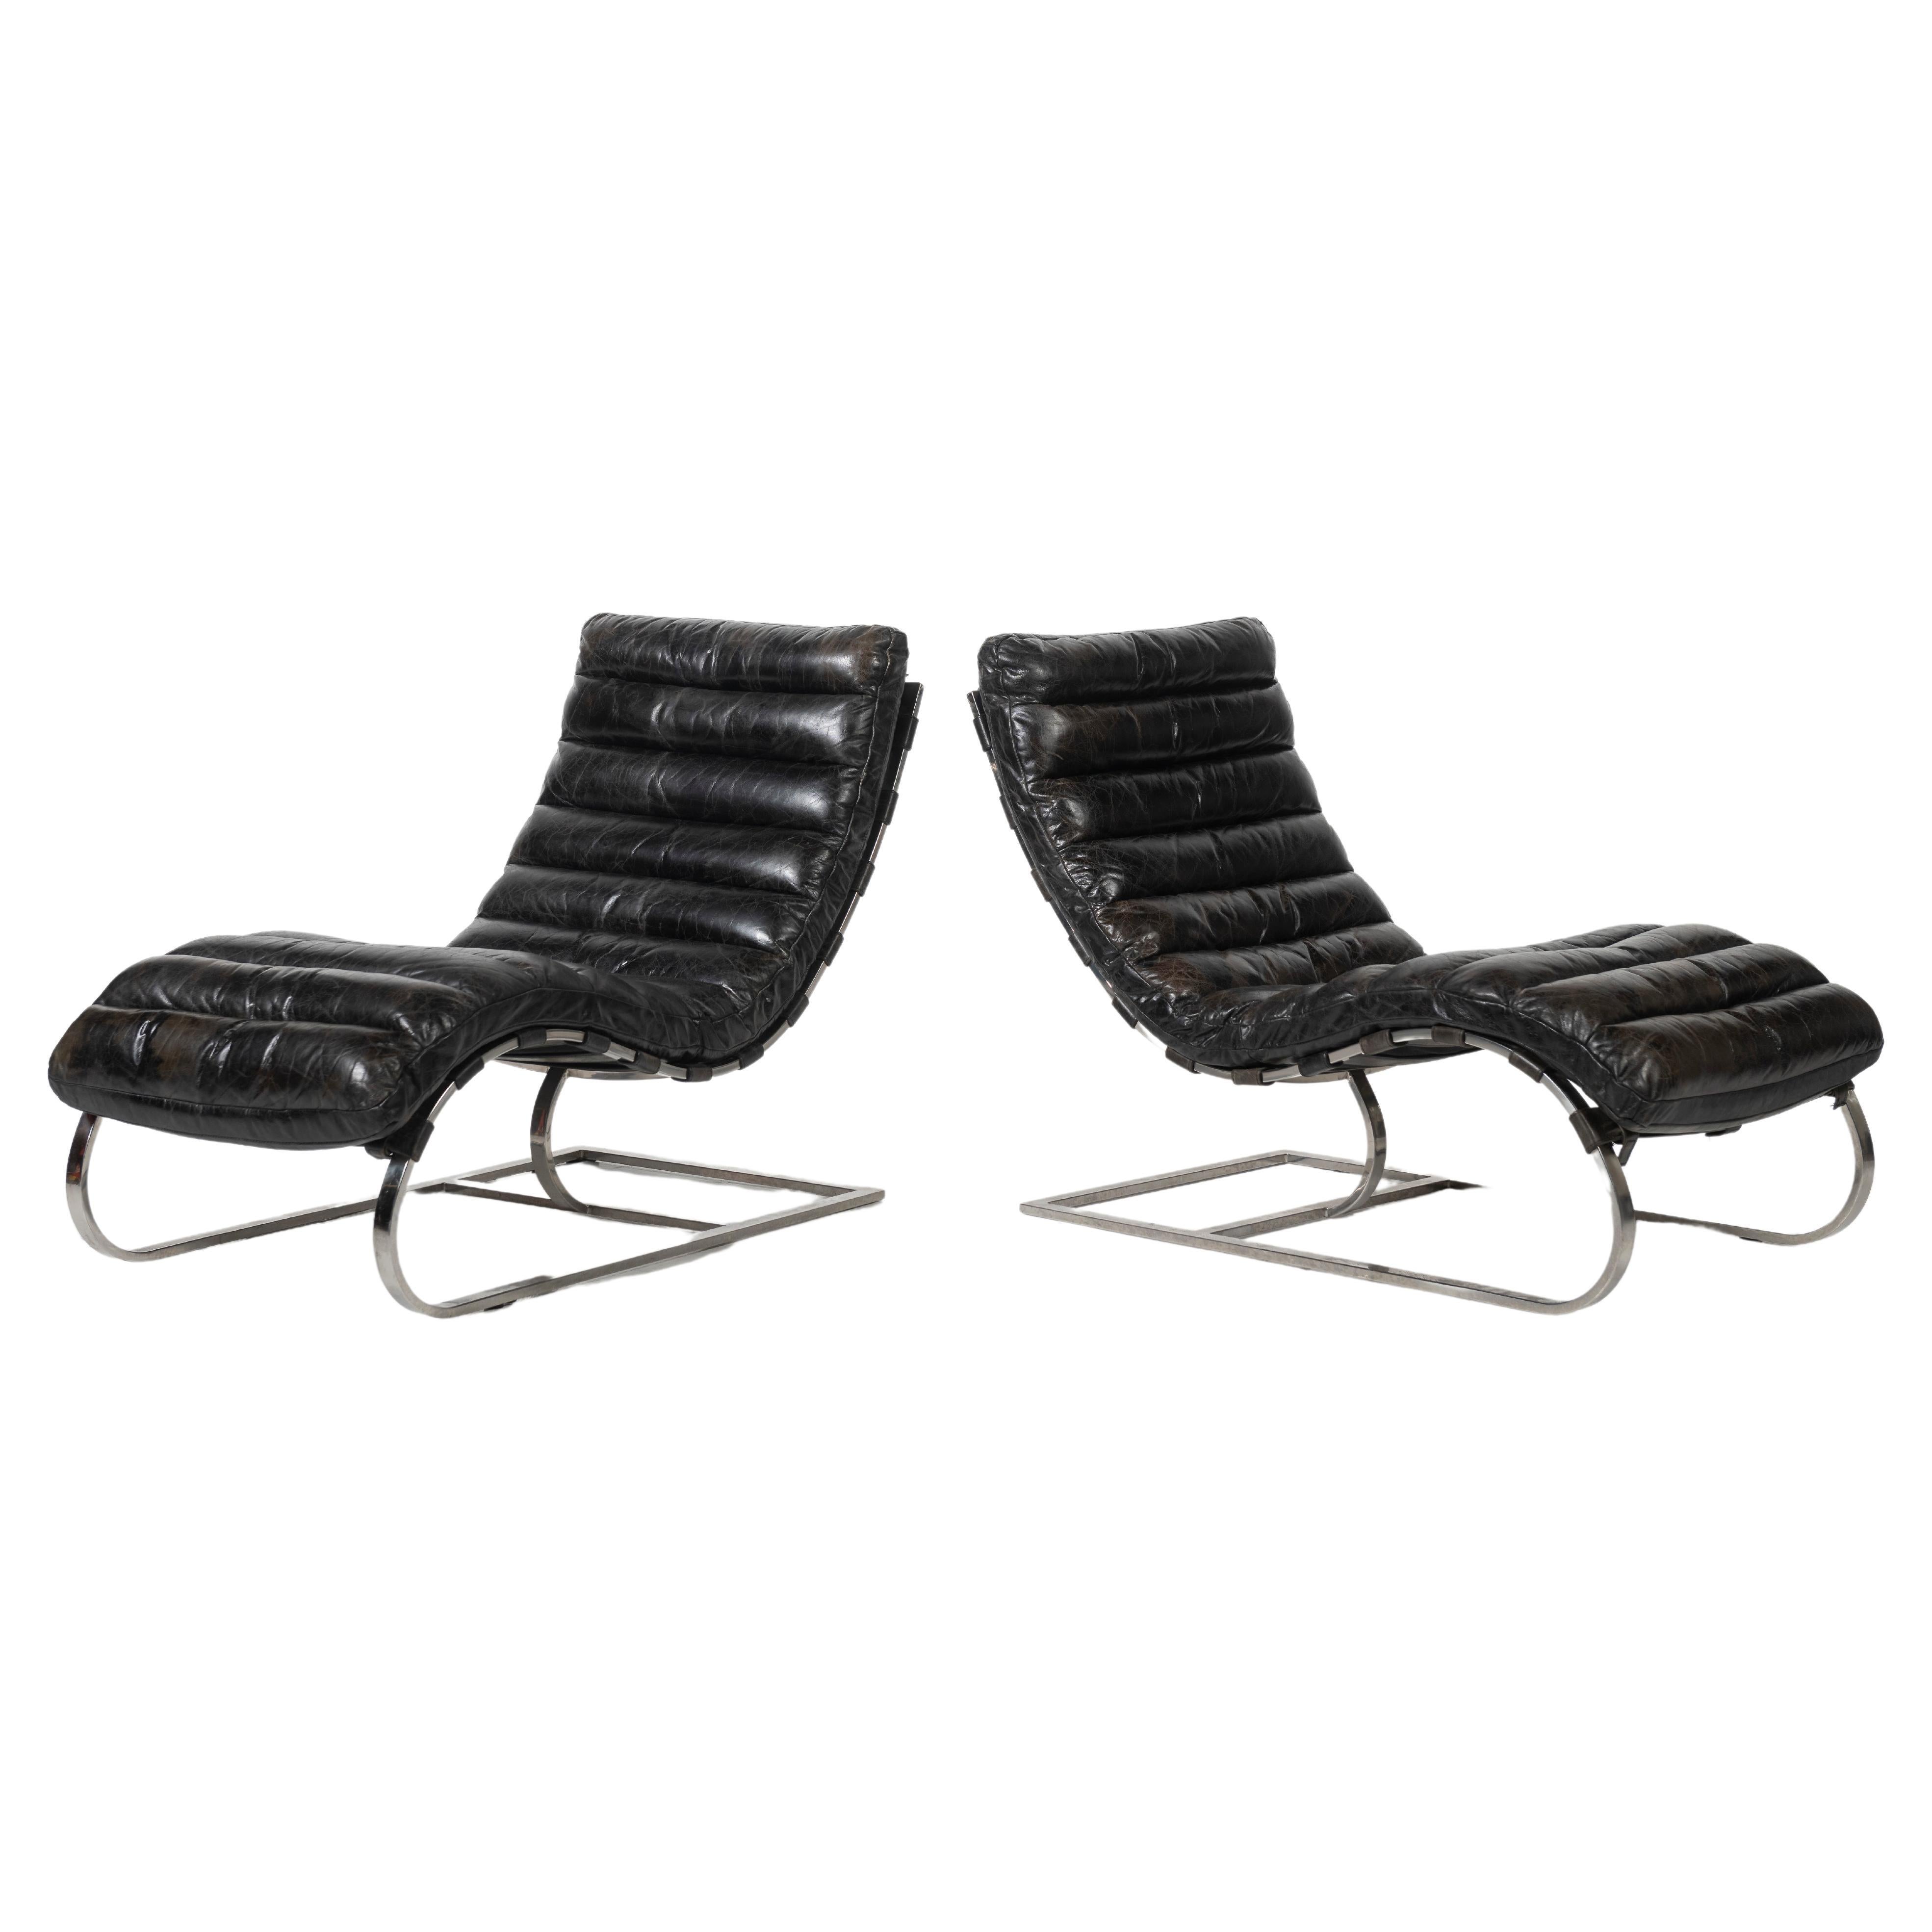 Pair of Vintage Michel Boyer Chromed Steel & Black Leather Chaise Lounge Chairs